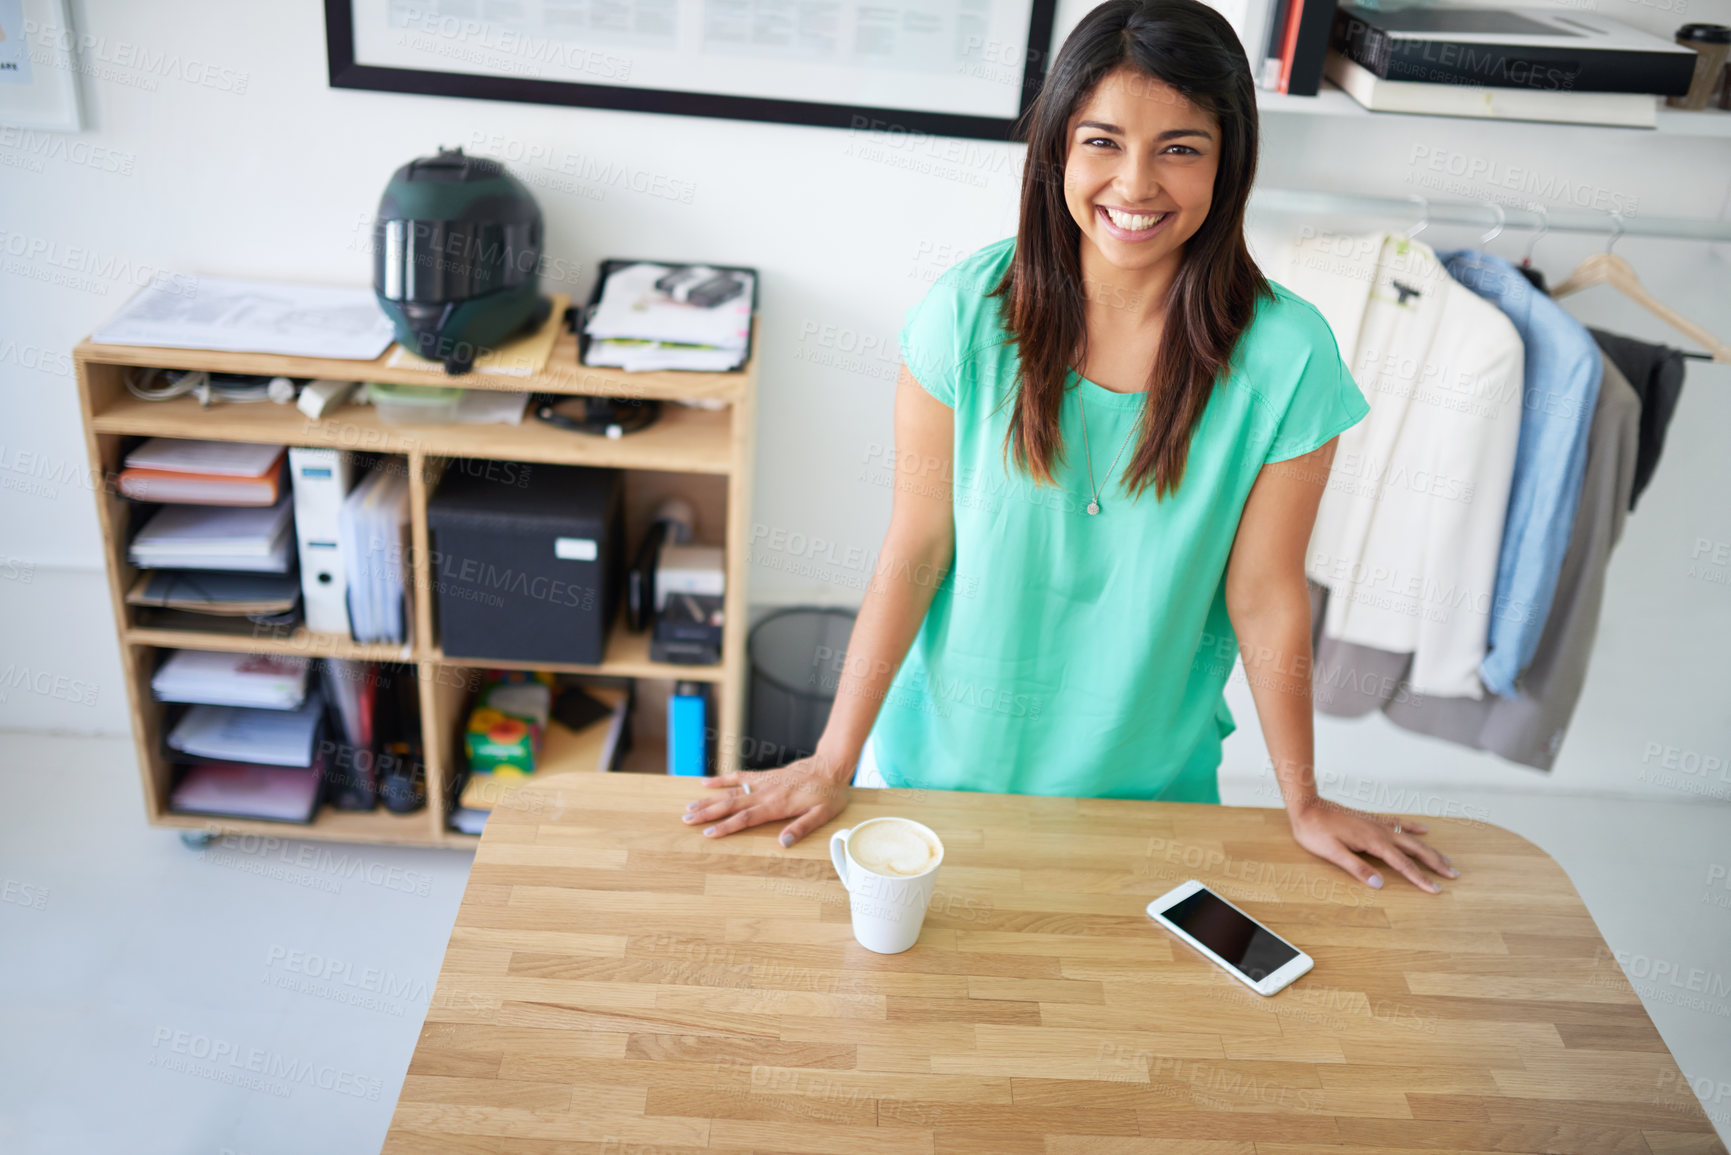 Buy stock photo Portrait of a young female designer at her desk